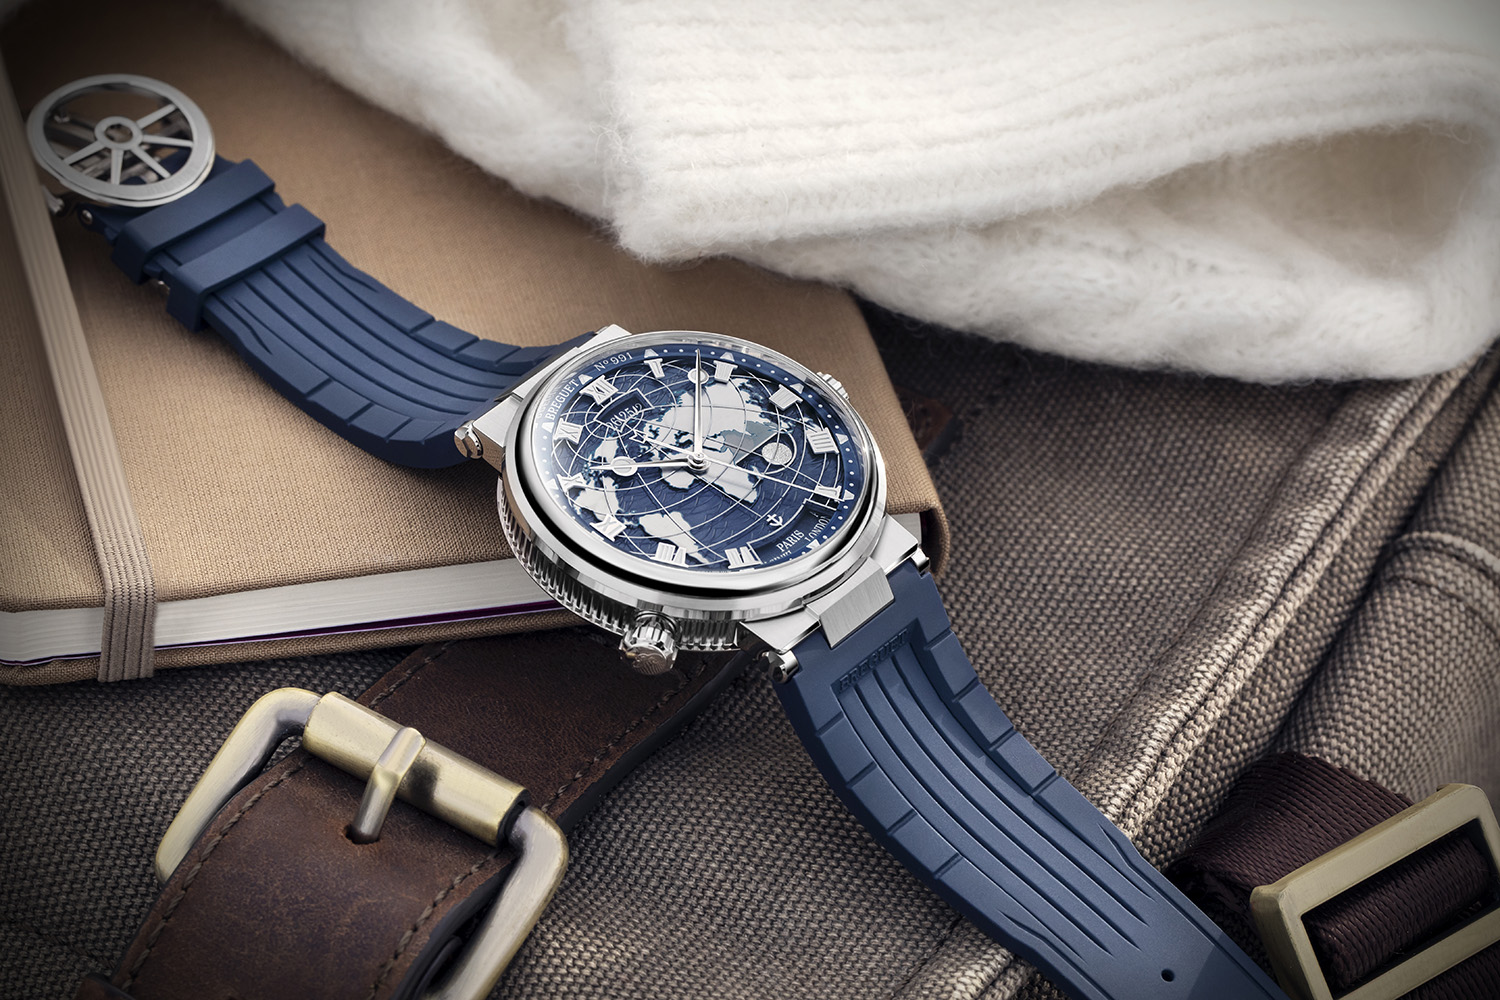 Louis Vuitton Tambour Moon Dual Time is a watch for globetrotters